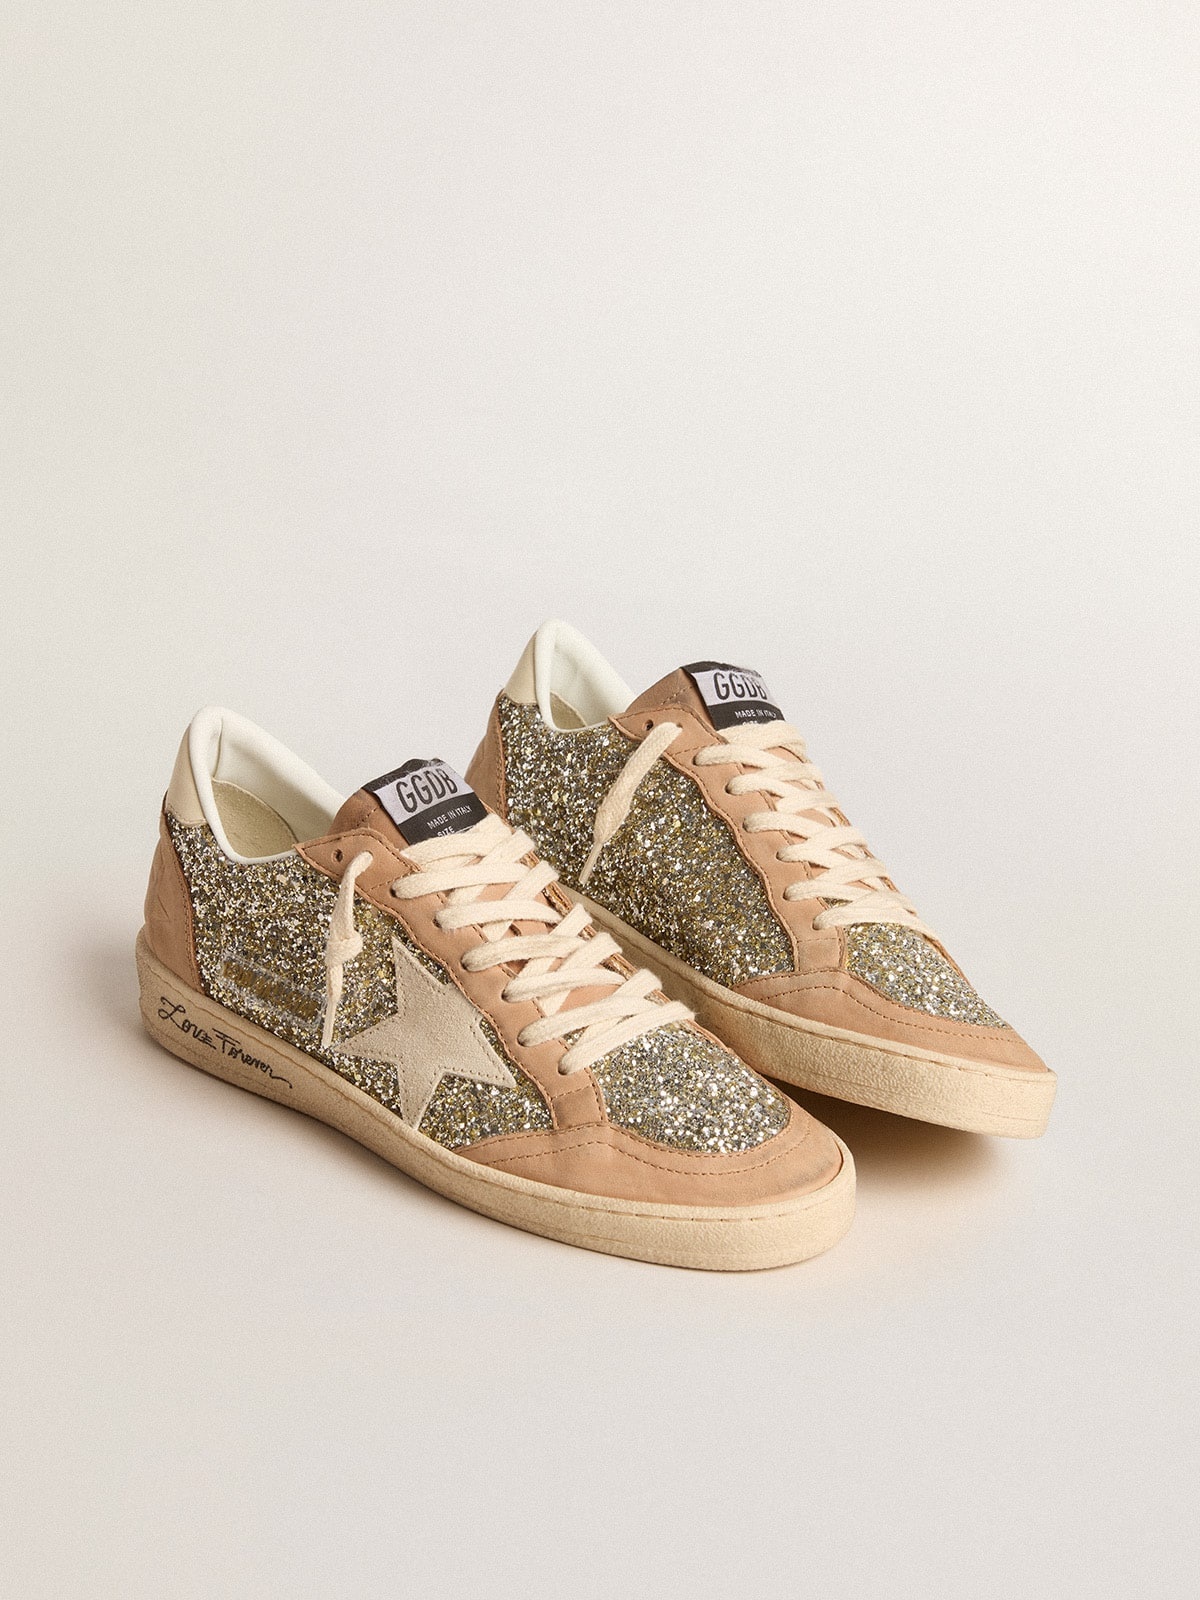 Ball Star in platinum glitter with cream leather star and nubuck toe - 2